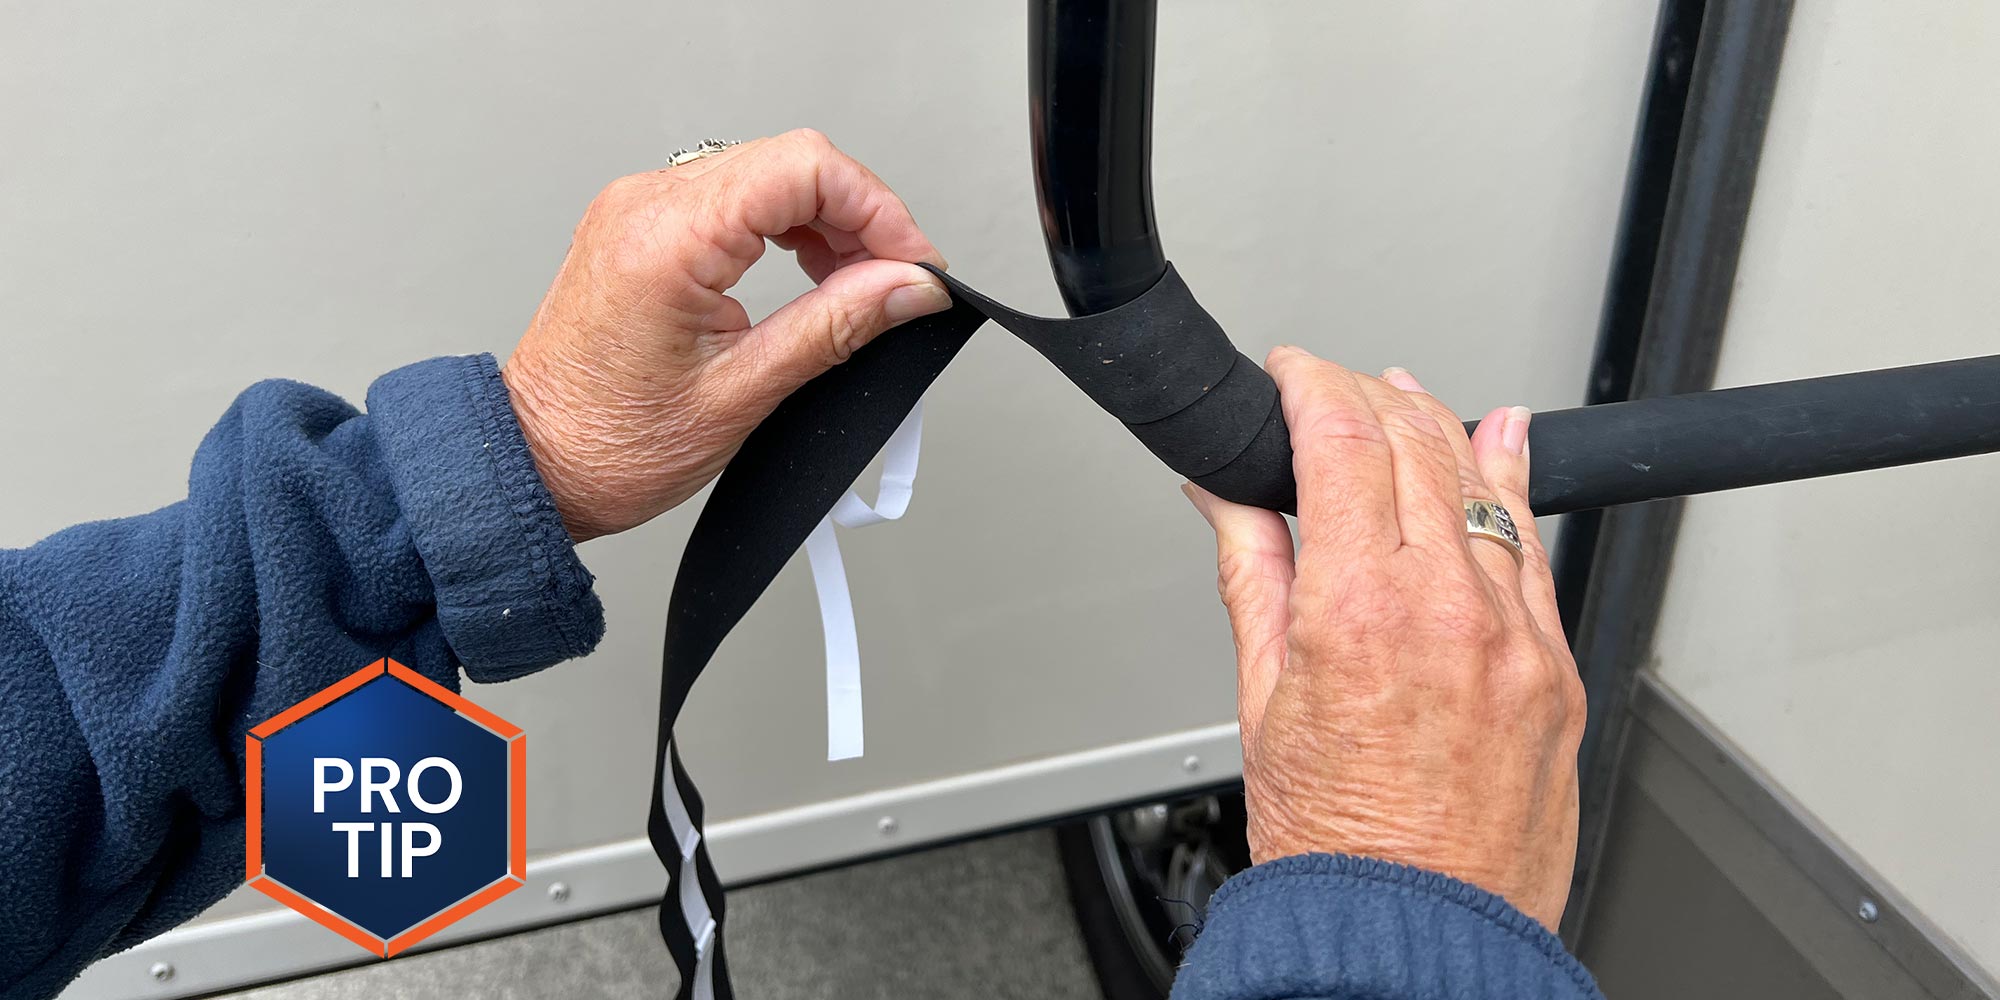 close view of hands wrapping grip material around a handle on an RV